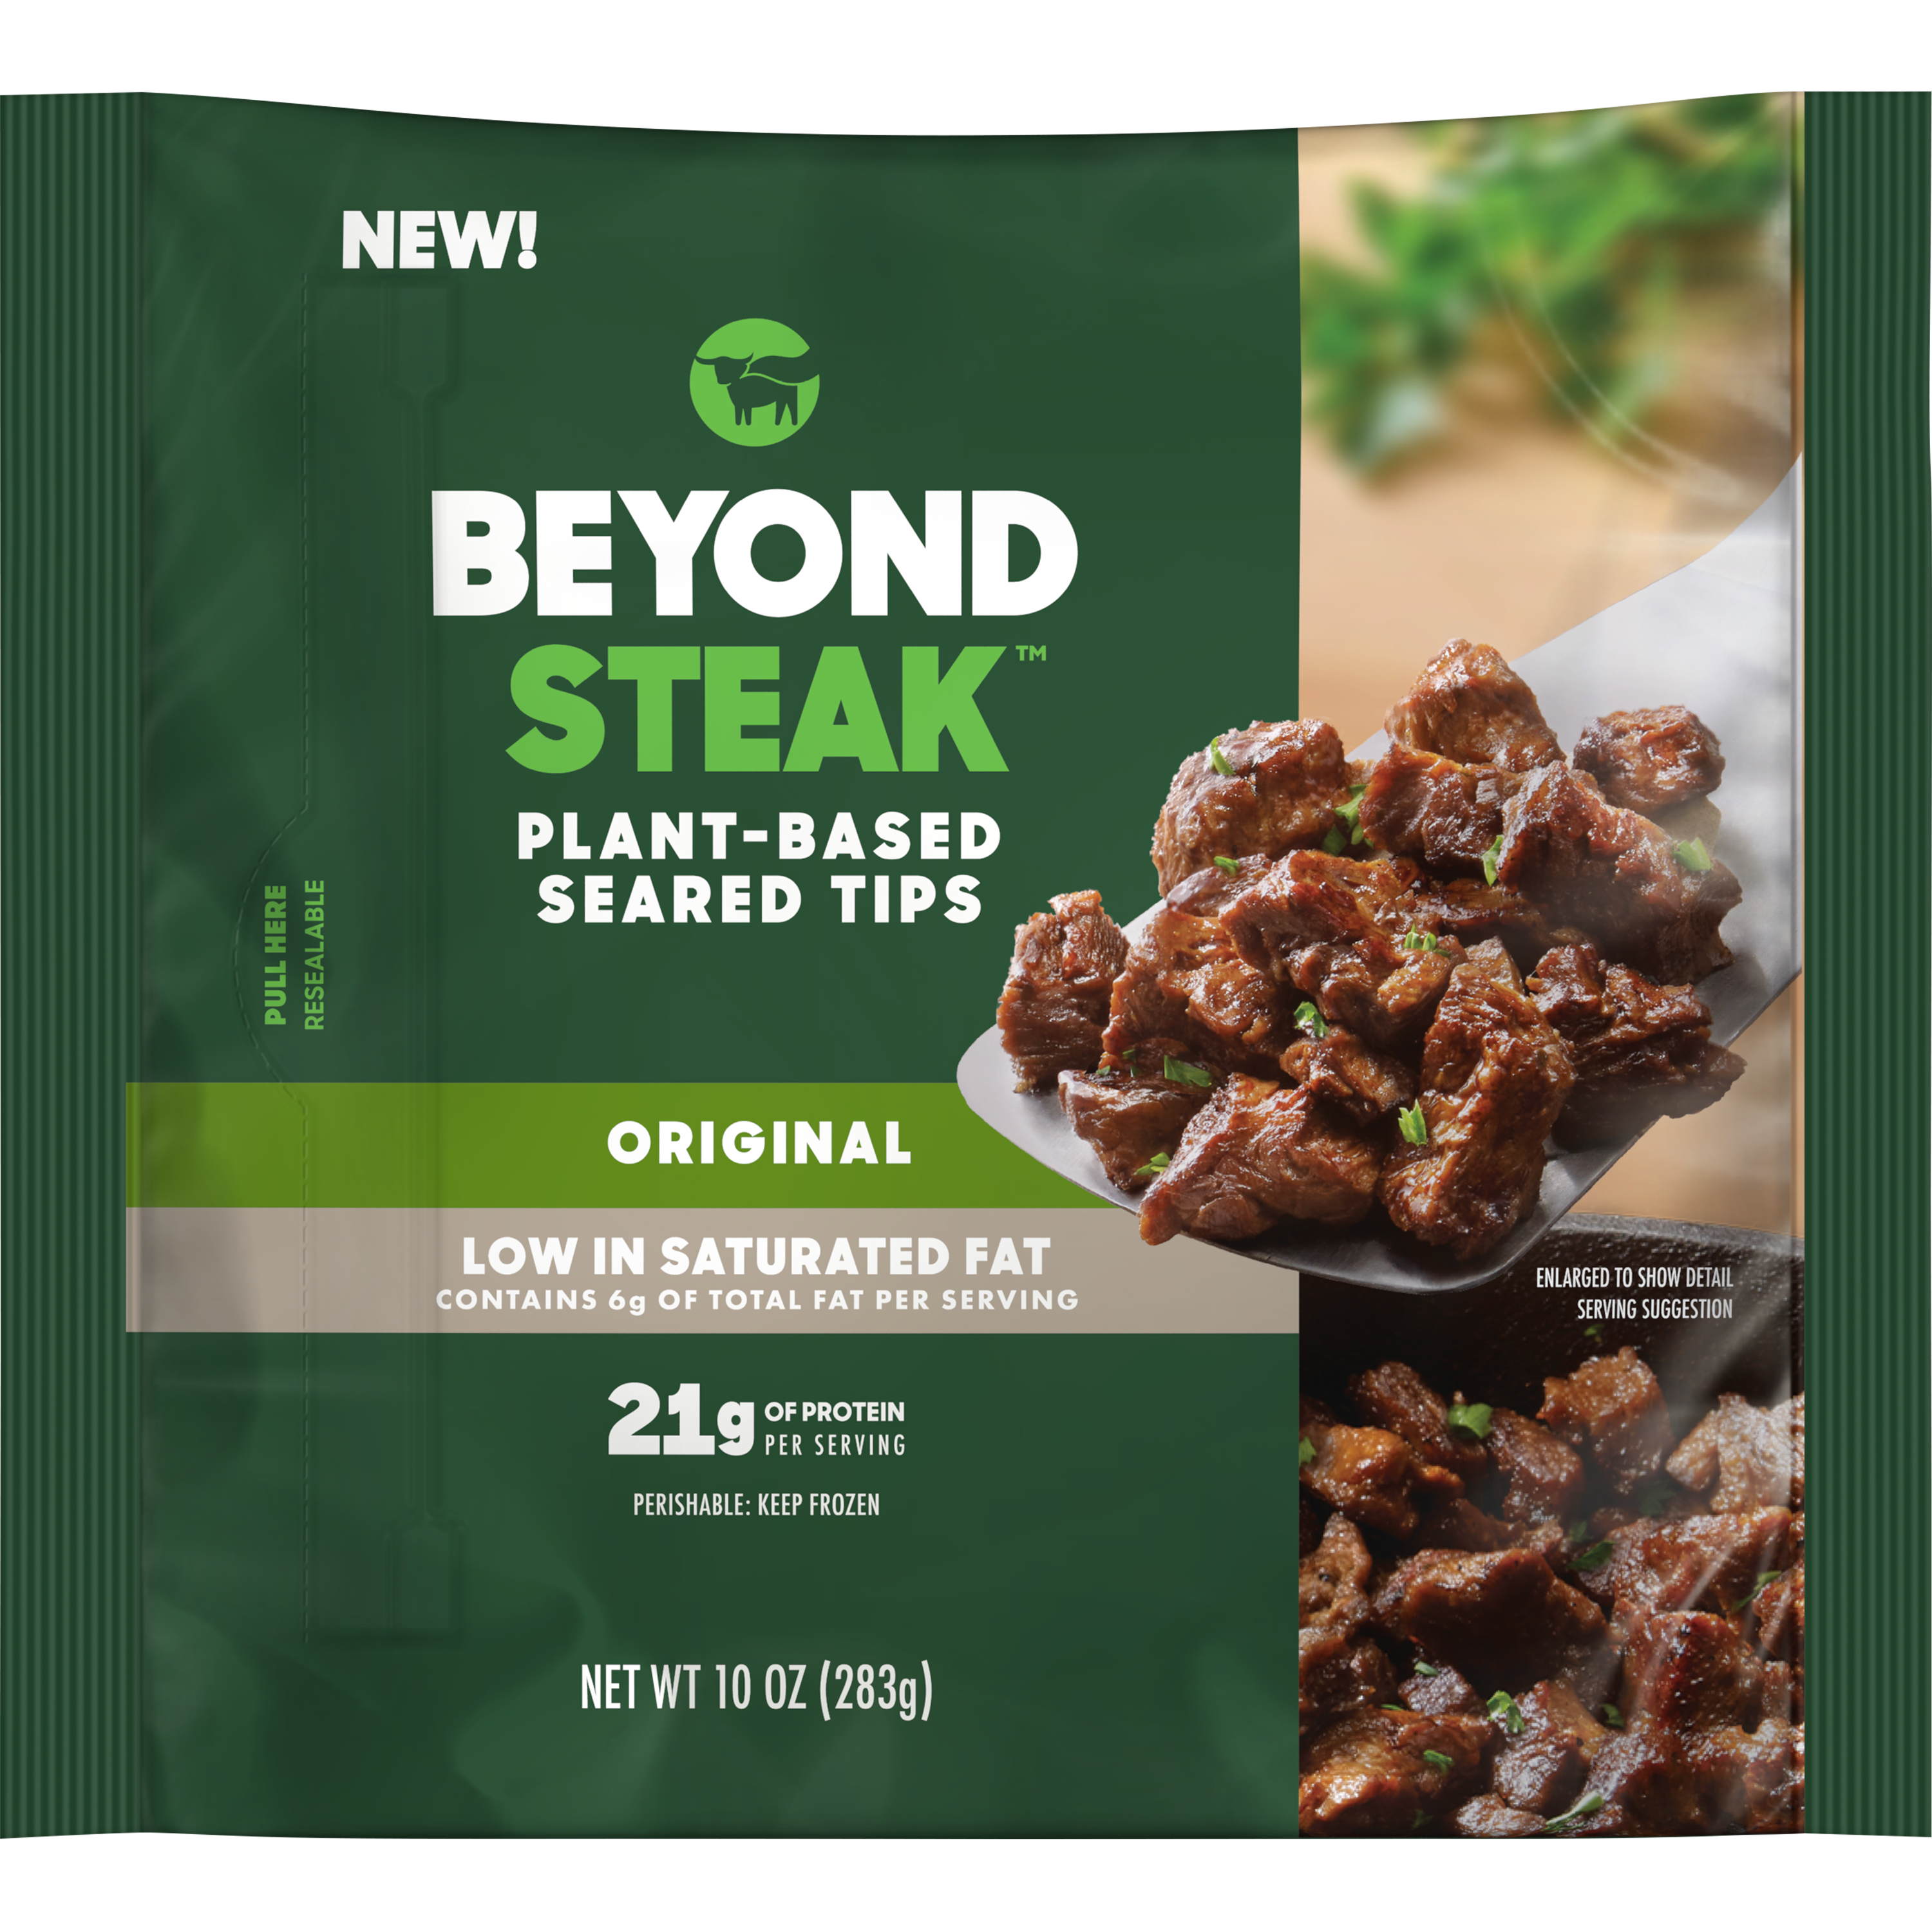 Beyond Steak: Delicious Taste of Seared Steak Tips with Impressive Nutrition Facts